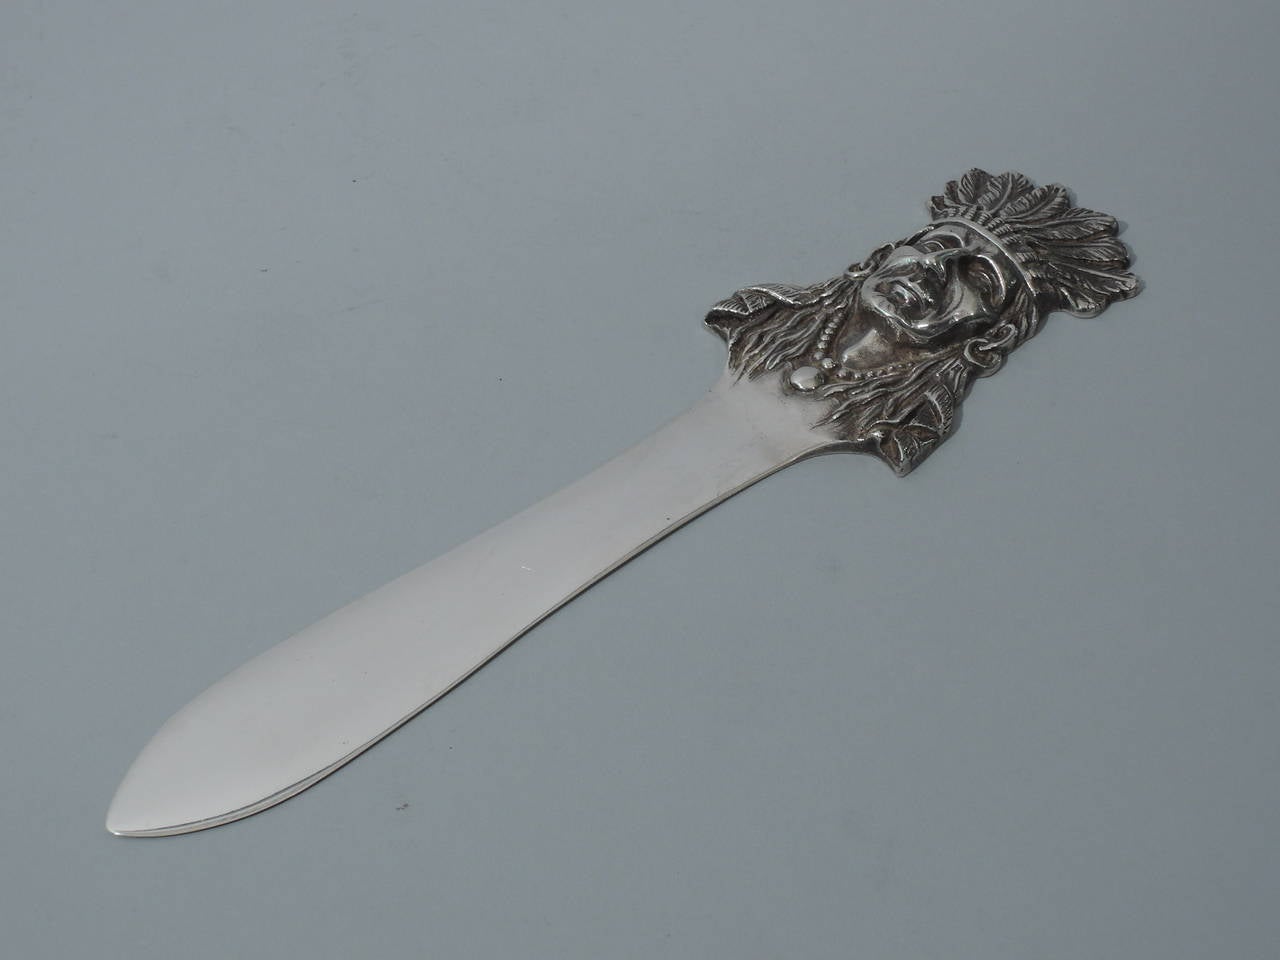 Sterling silver letter opener with Native American motif. Made by Black, Starr & Frost in New York, ca. 1900. Handle is bust of Indian chief with feathered headdress. Fine cast with clear details and good patina. Hallmarked. 

Length: 10 ½ in.